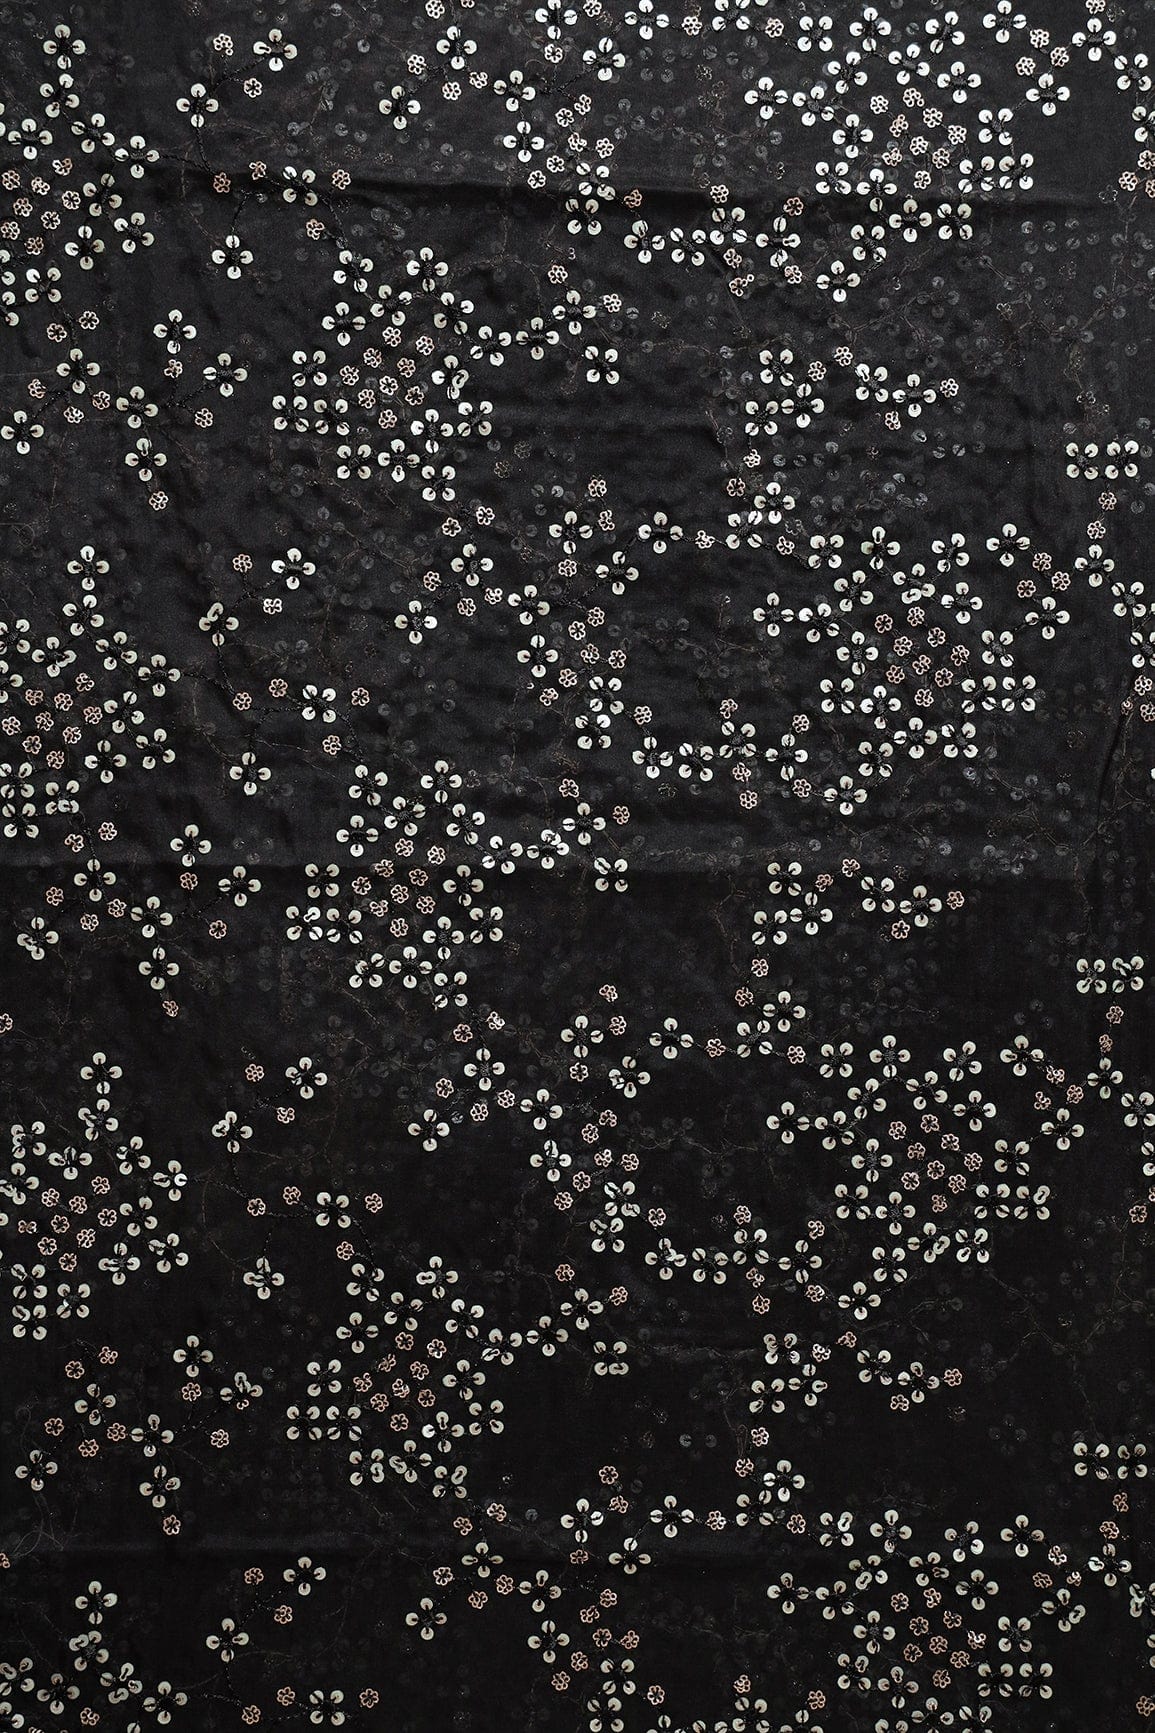 doeraa Embroidery Fabrics 3 Meter Cut Piece Of Gold And Silver Sequins Embroidery On Black Organza Fabric